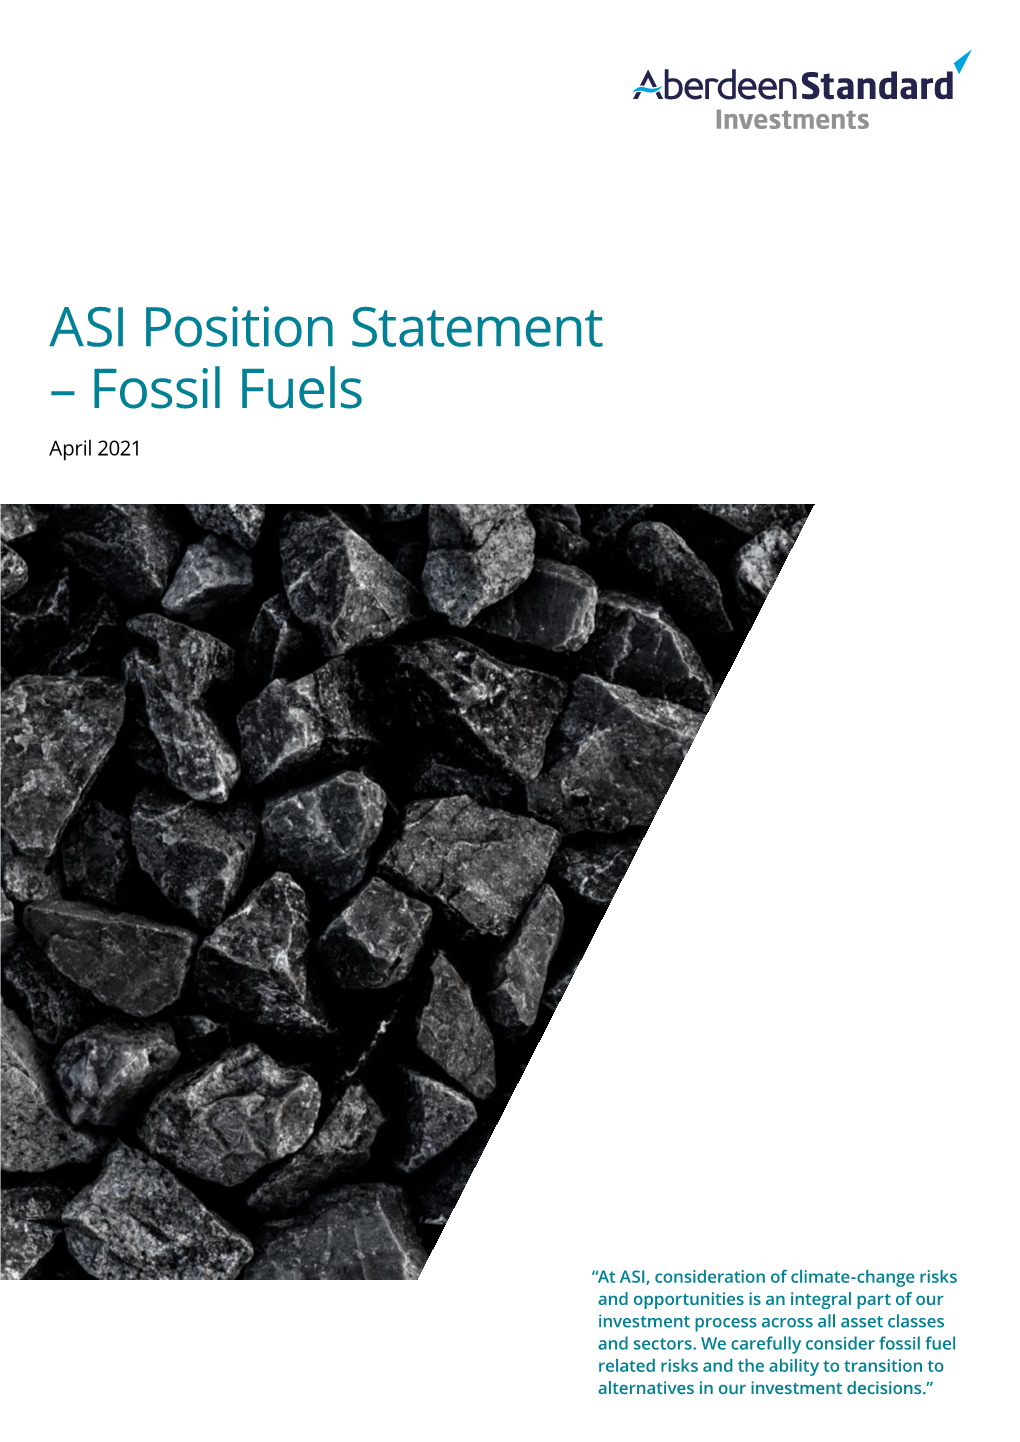 ASI Position Statement – Fossil Fuels April 2021